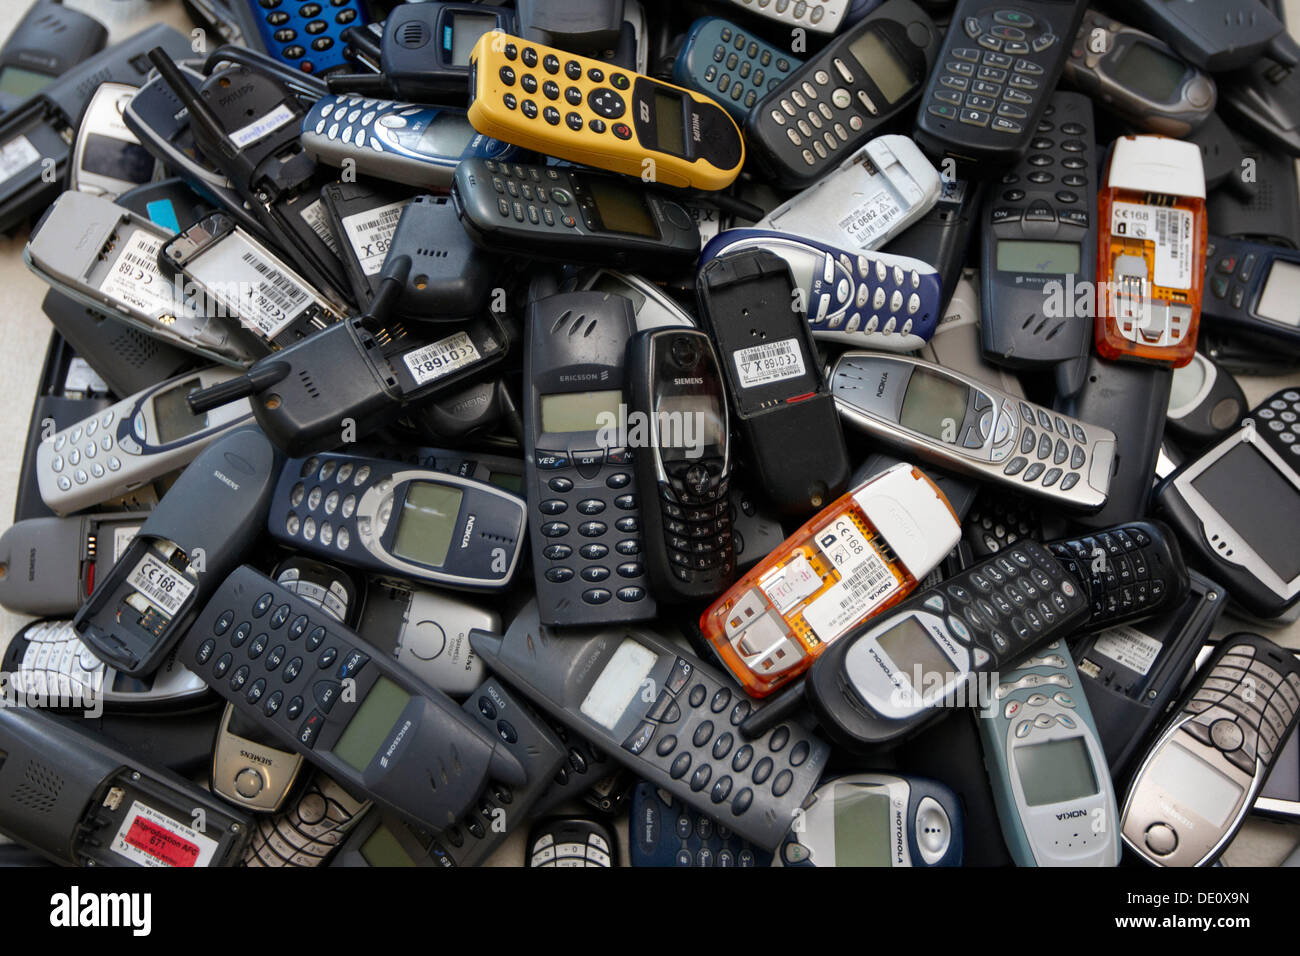 Cell phones, old mobile phones on a pile Stock Photo